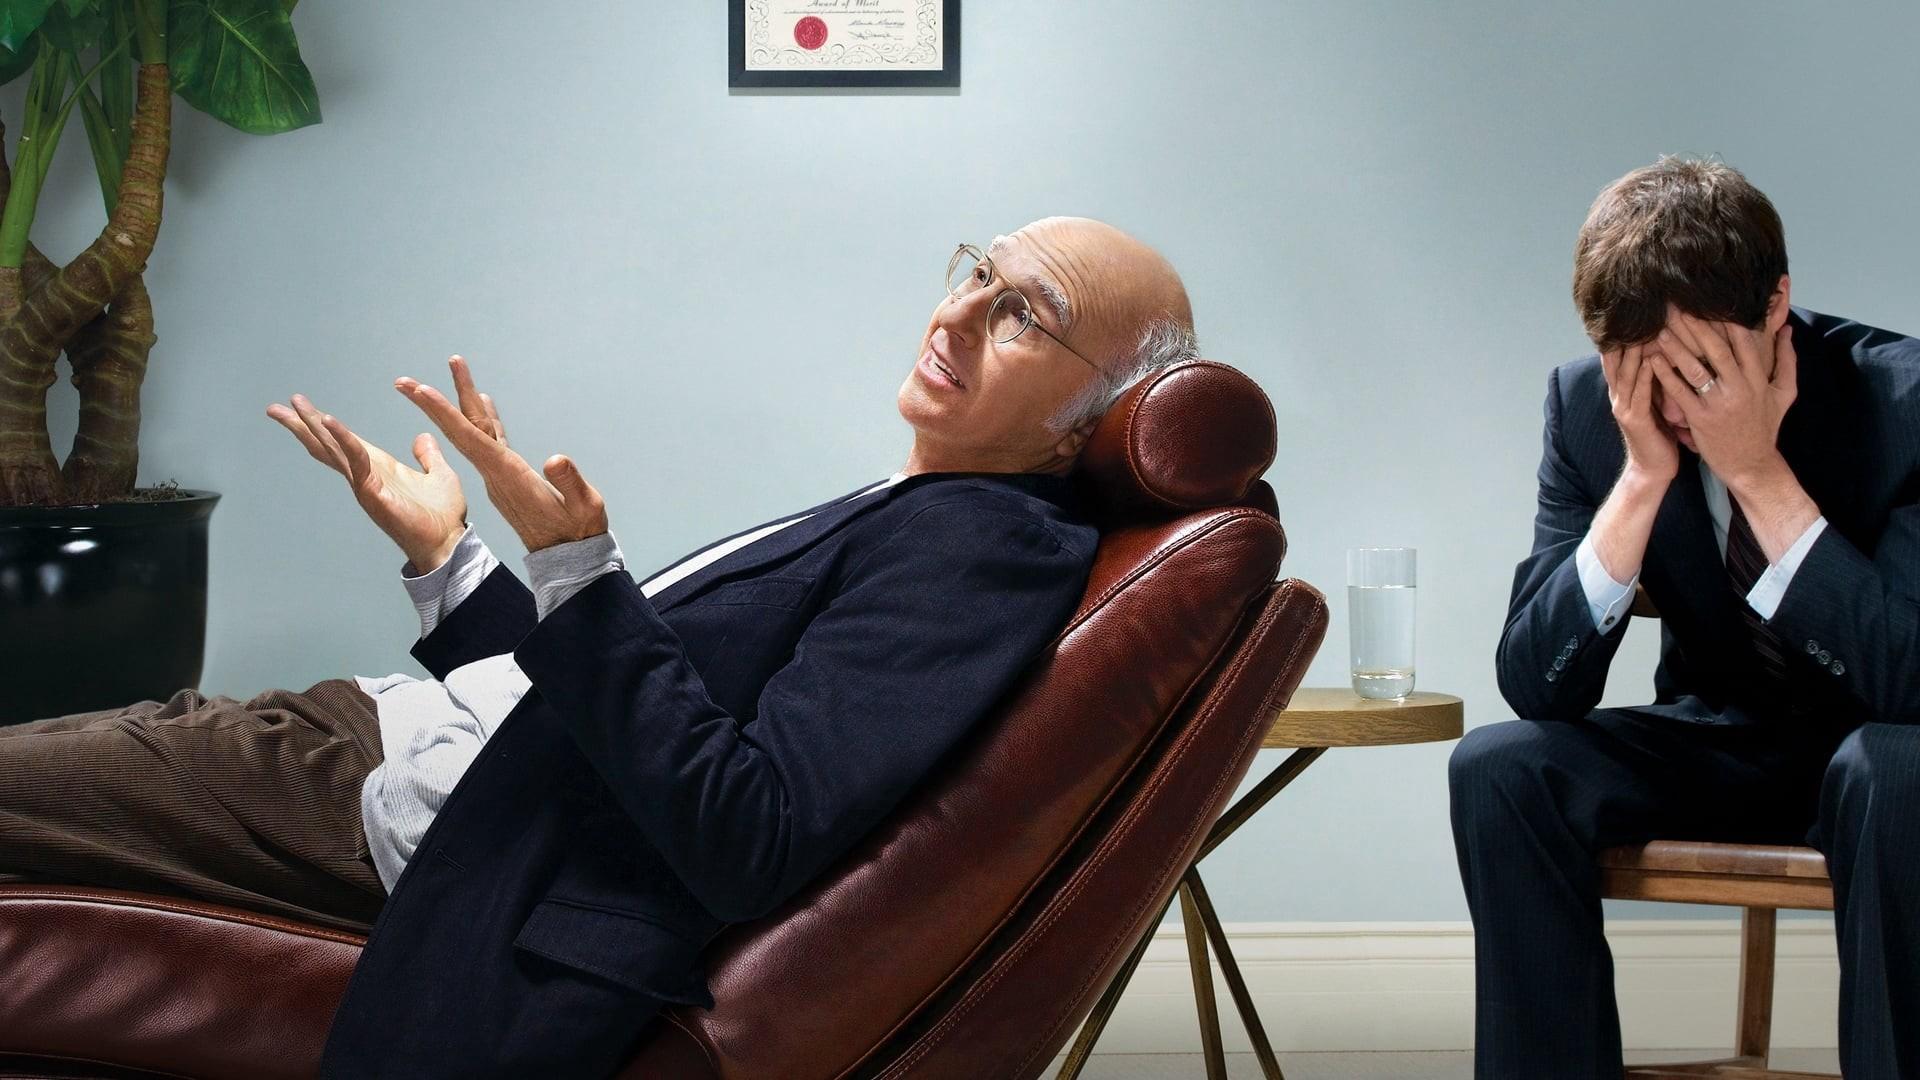 Curb Your Enthusiasm (UK) Series 10 Episode 1 Full Episodes